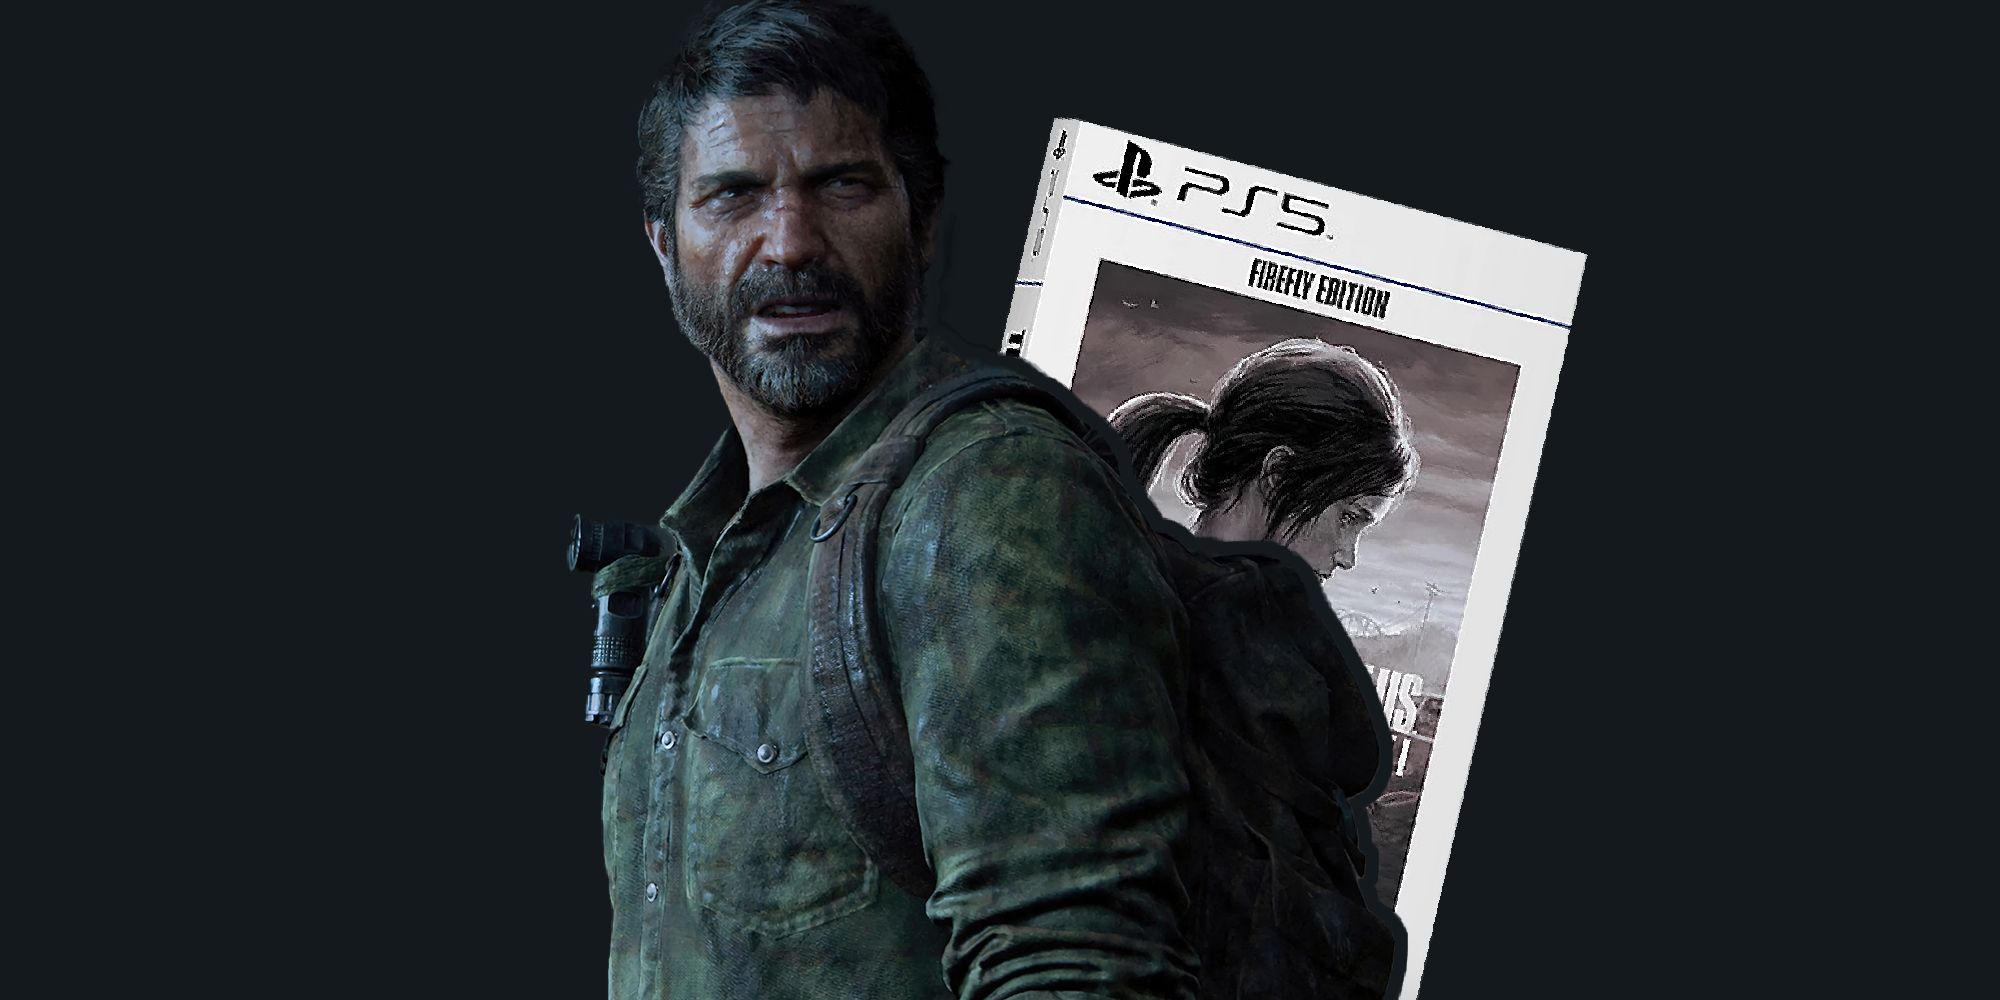 The Last of Us Part 1: All Training Manual locations